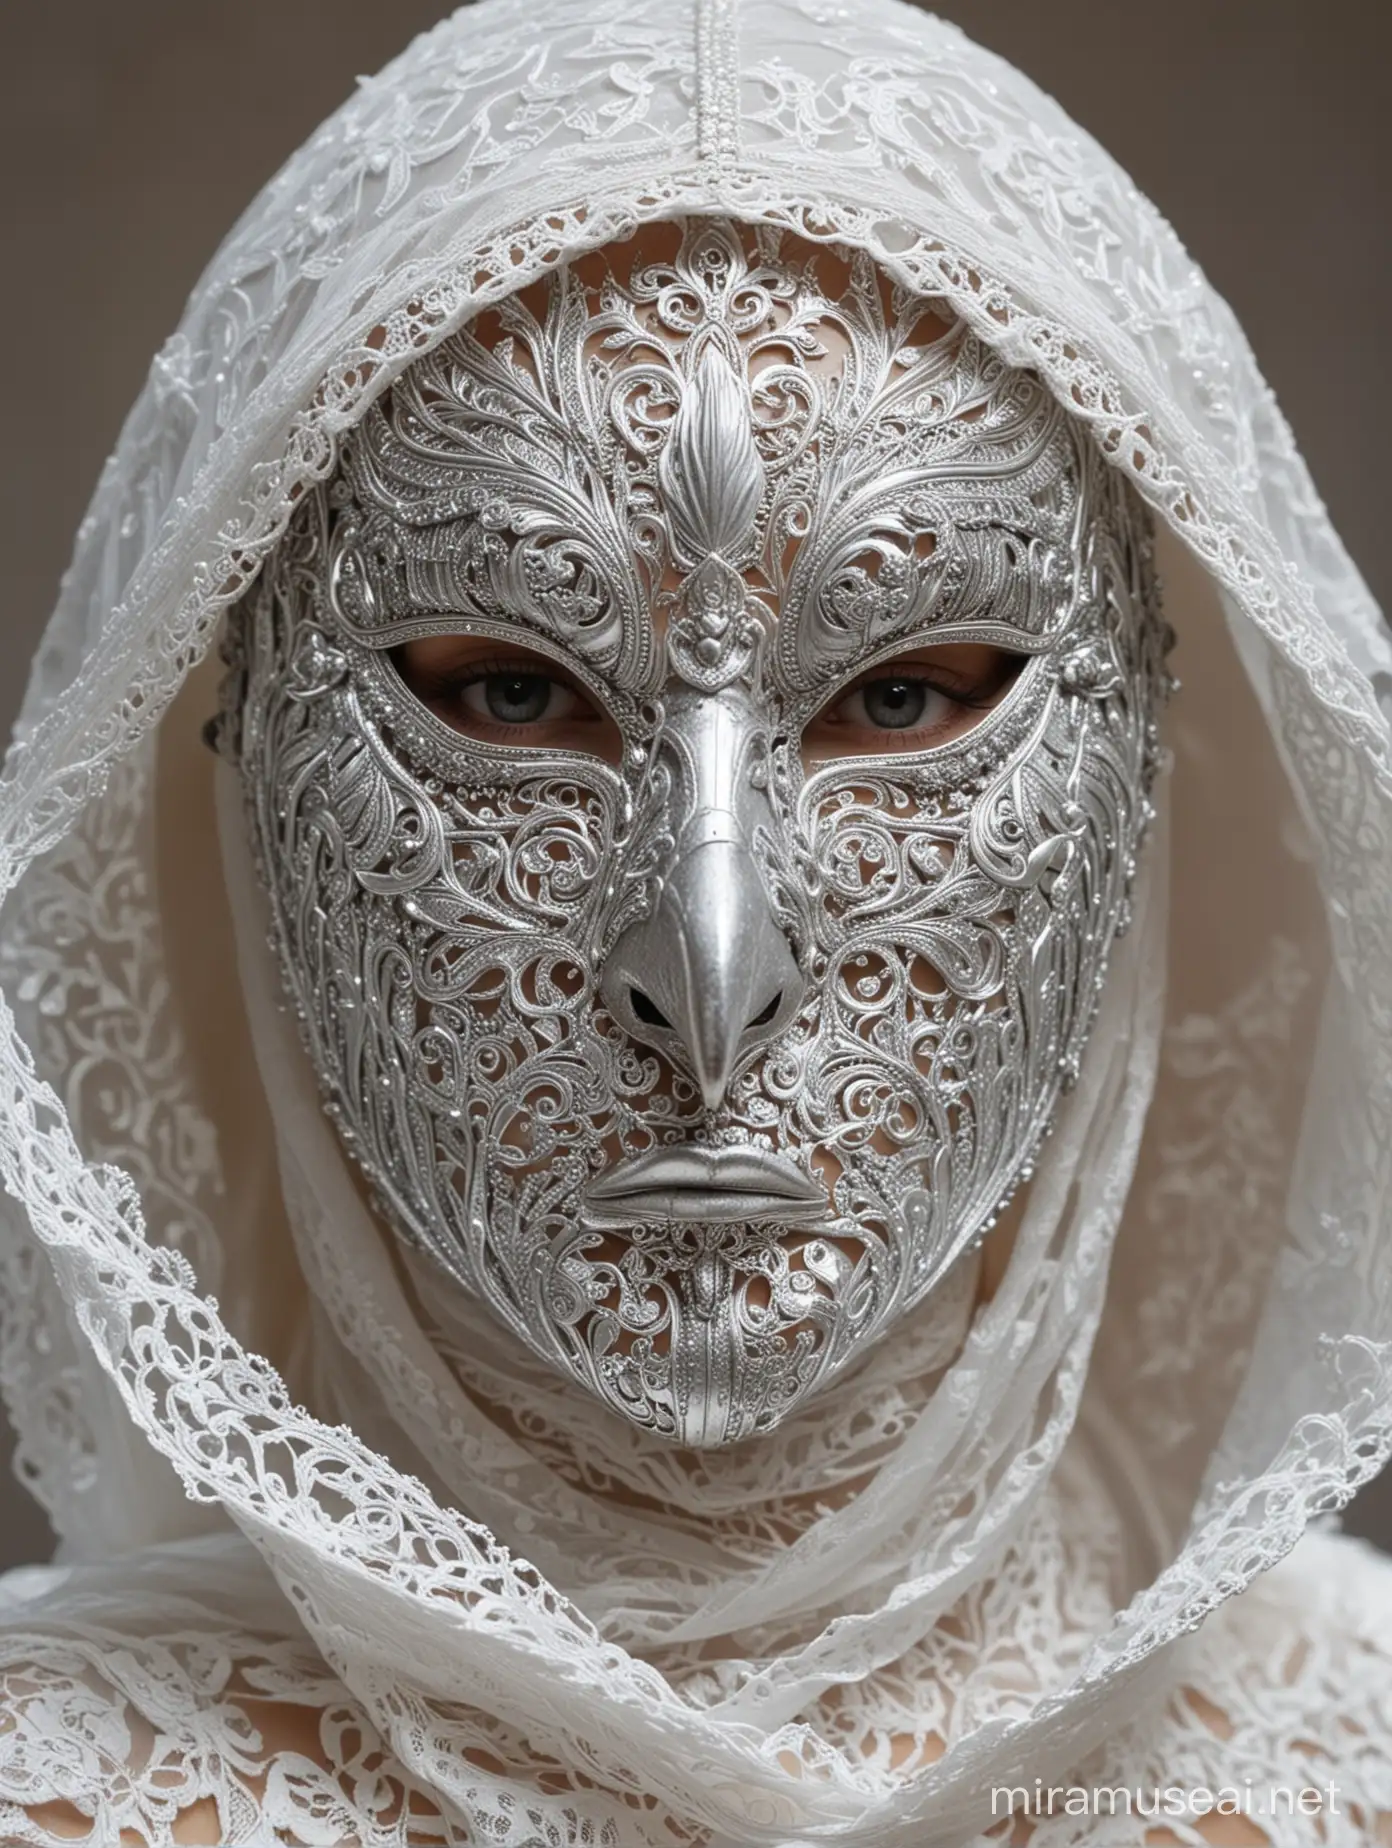 a silver mask in the shape of a bird that completely covers the eyes, under a hood of white lace